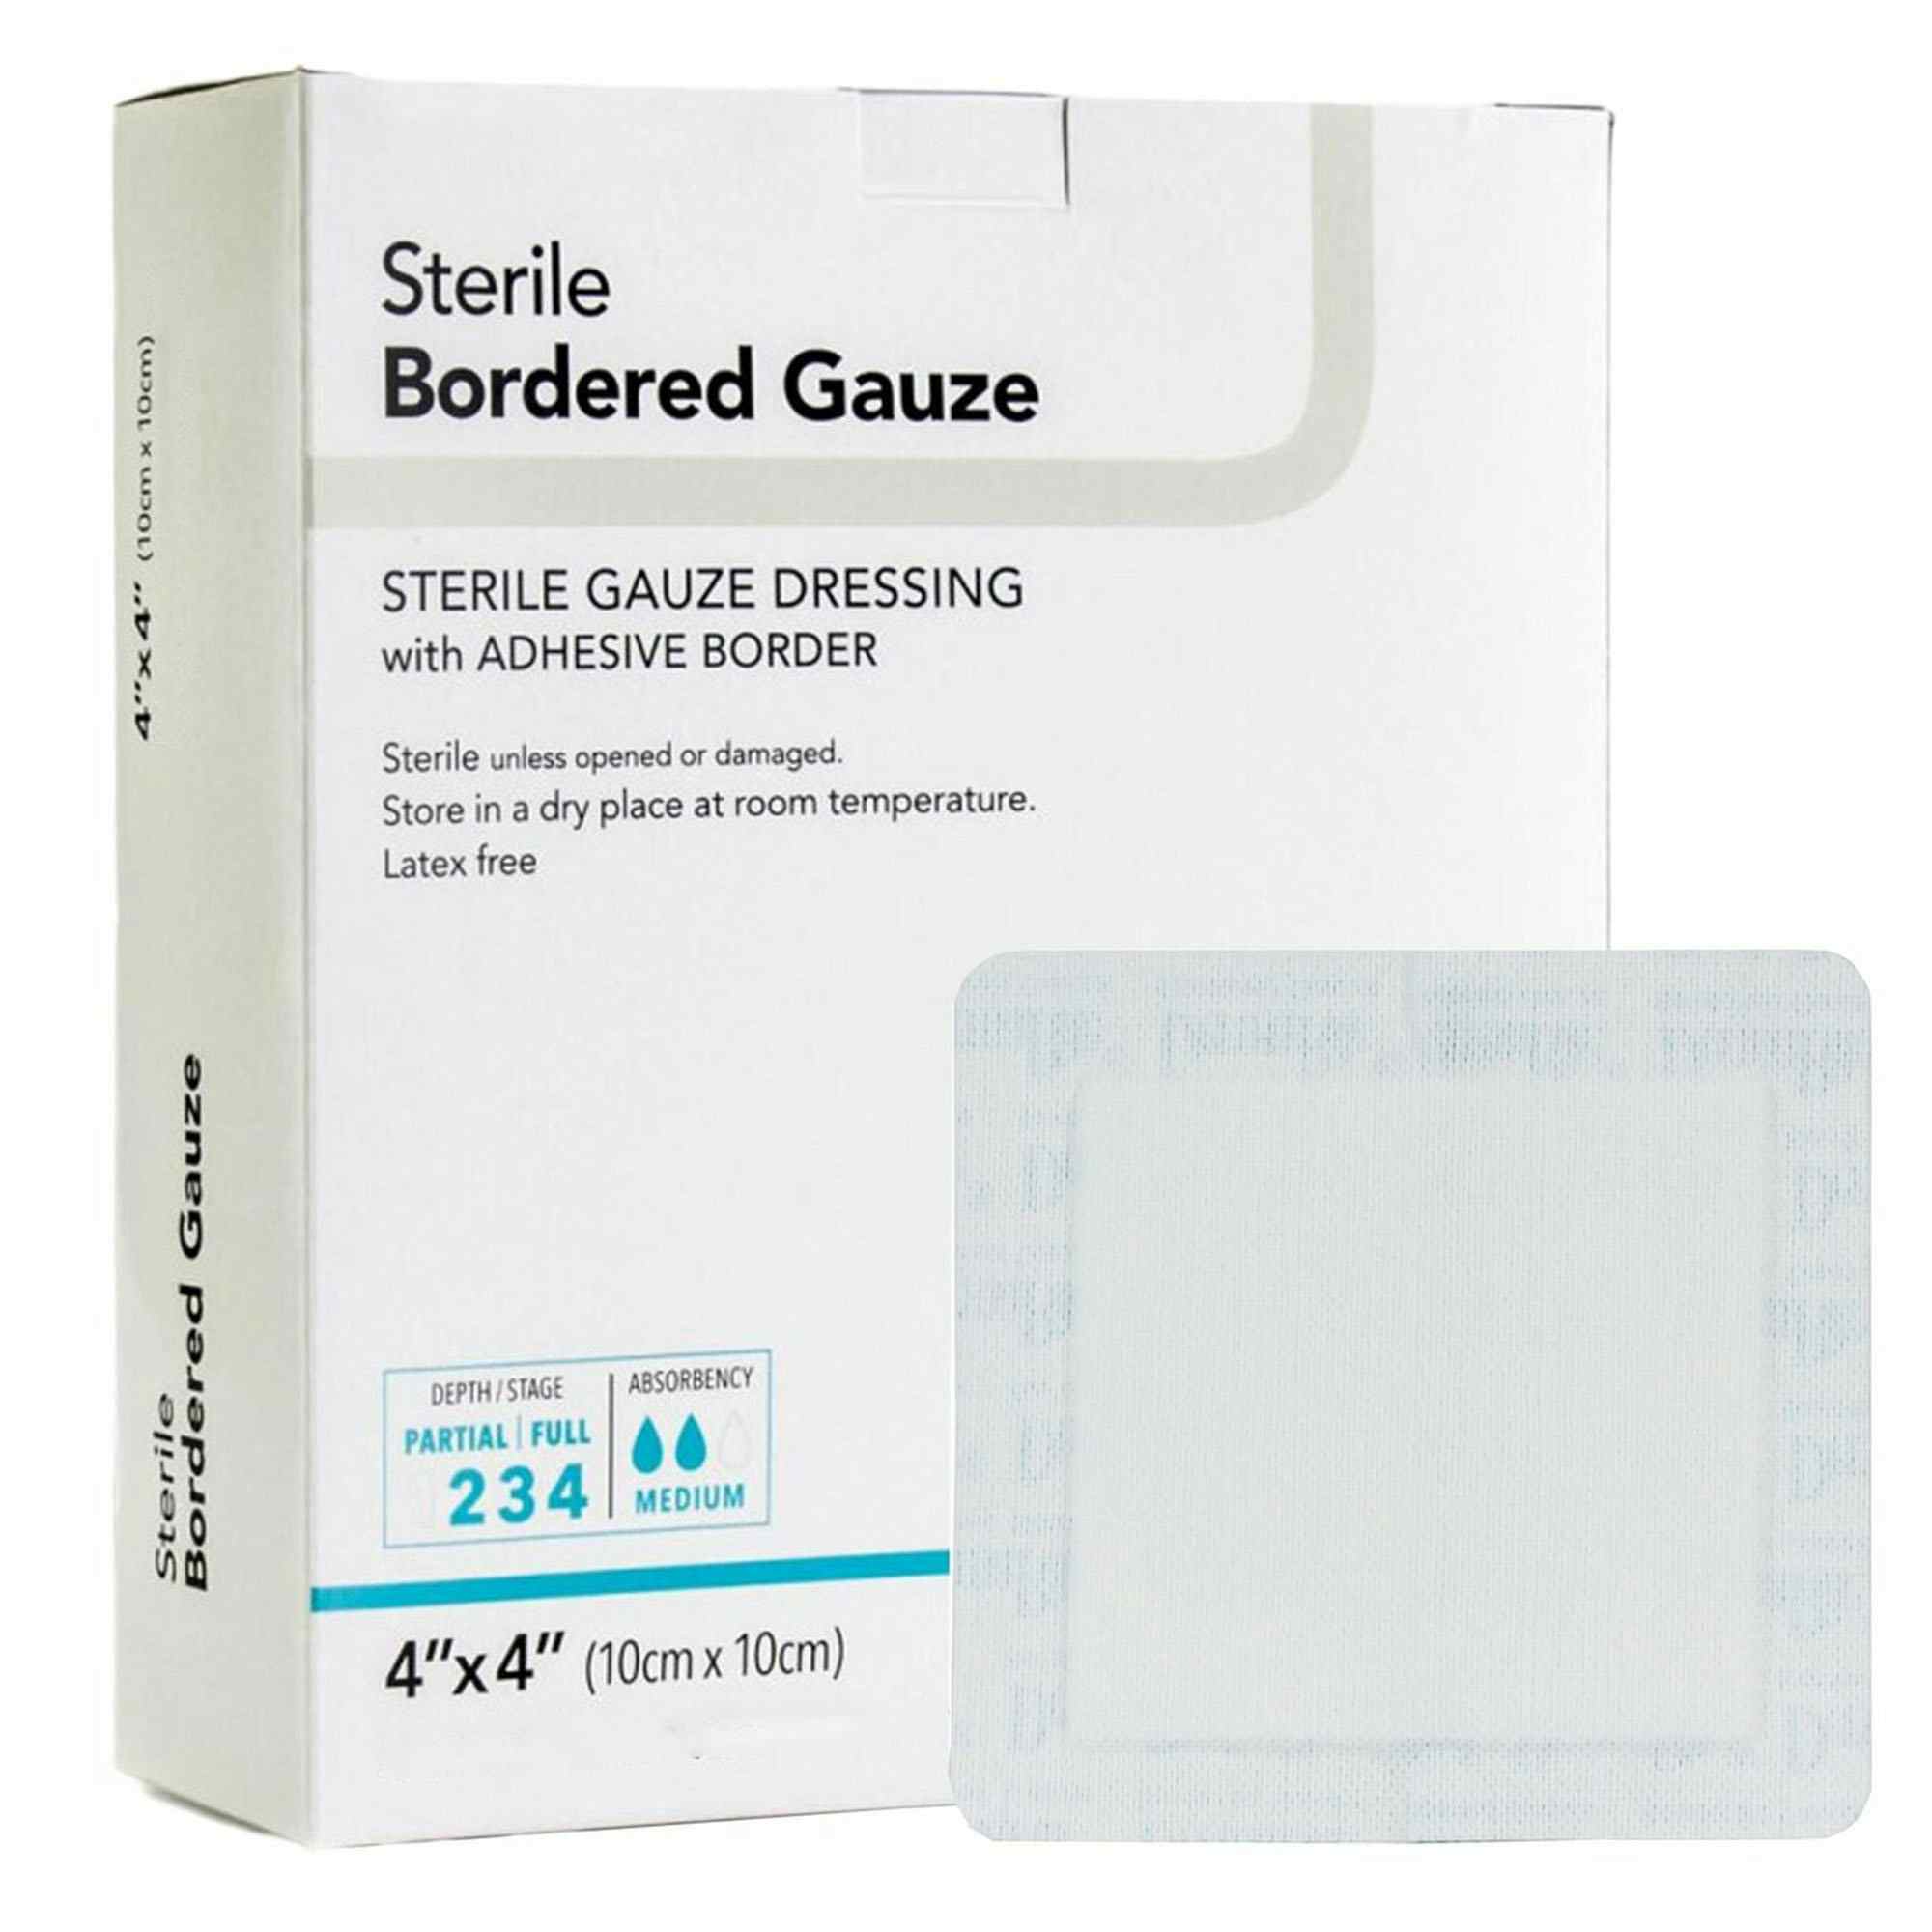 DermaRite Sterile Gauze Dressing with Adhesive Border, 4 X 4", 00255, Pack of 100